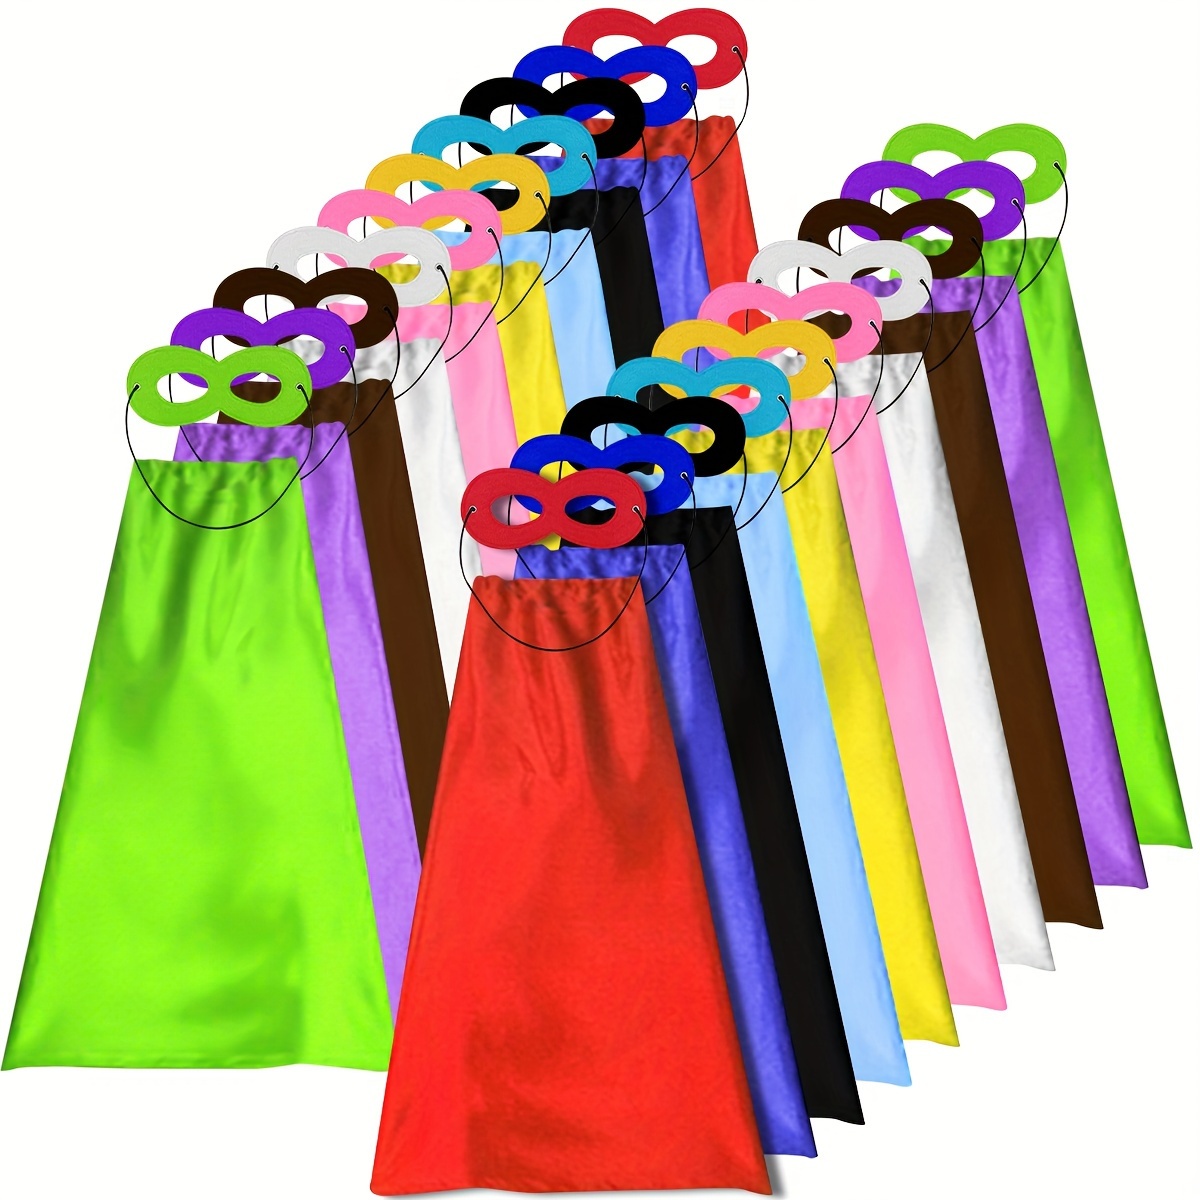 

Superhero-capes For Kids 10 Sets, Birthday Gifts For Boys Girls Role Play, Super Hero Toys For School Halloween Party